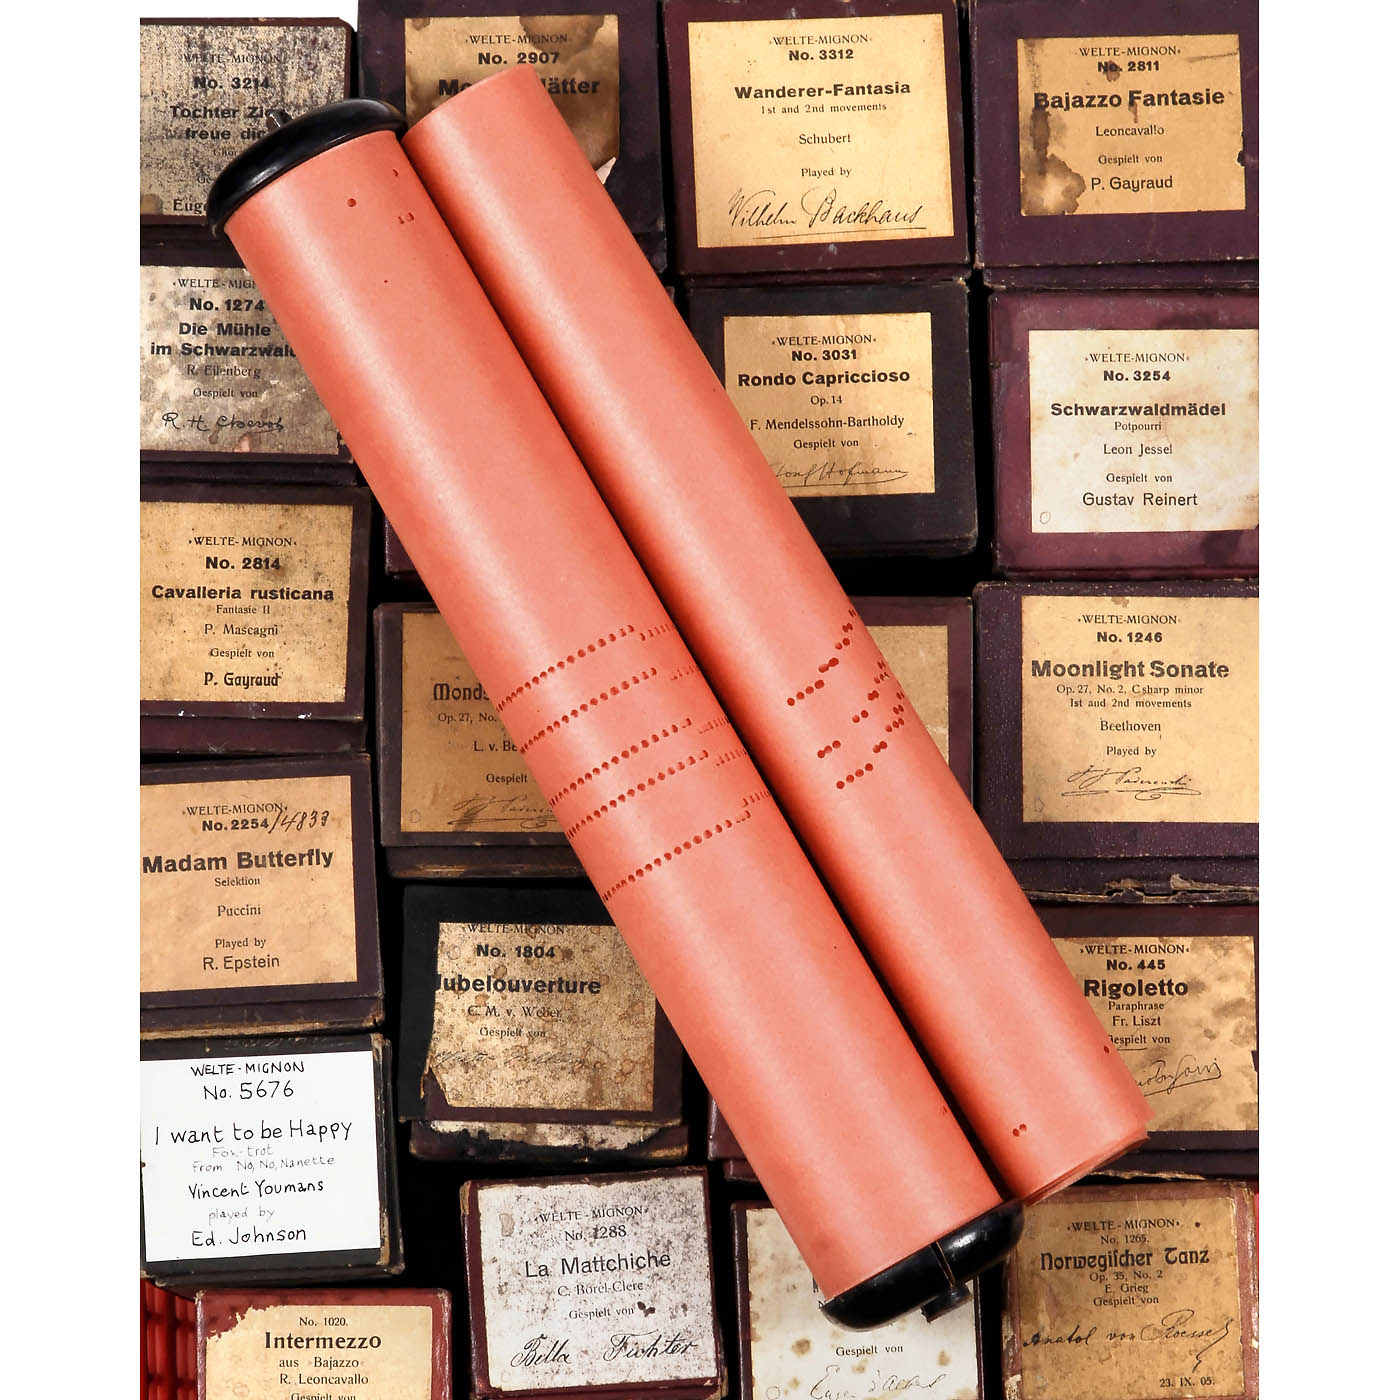 44 Welte-Mignon Reproducing Piano Rolls (Red), 1905 onwards - Image 3 of 4